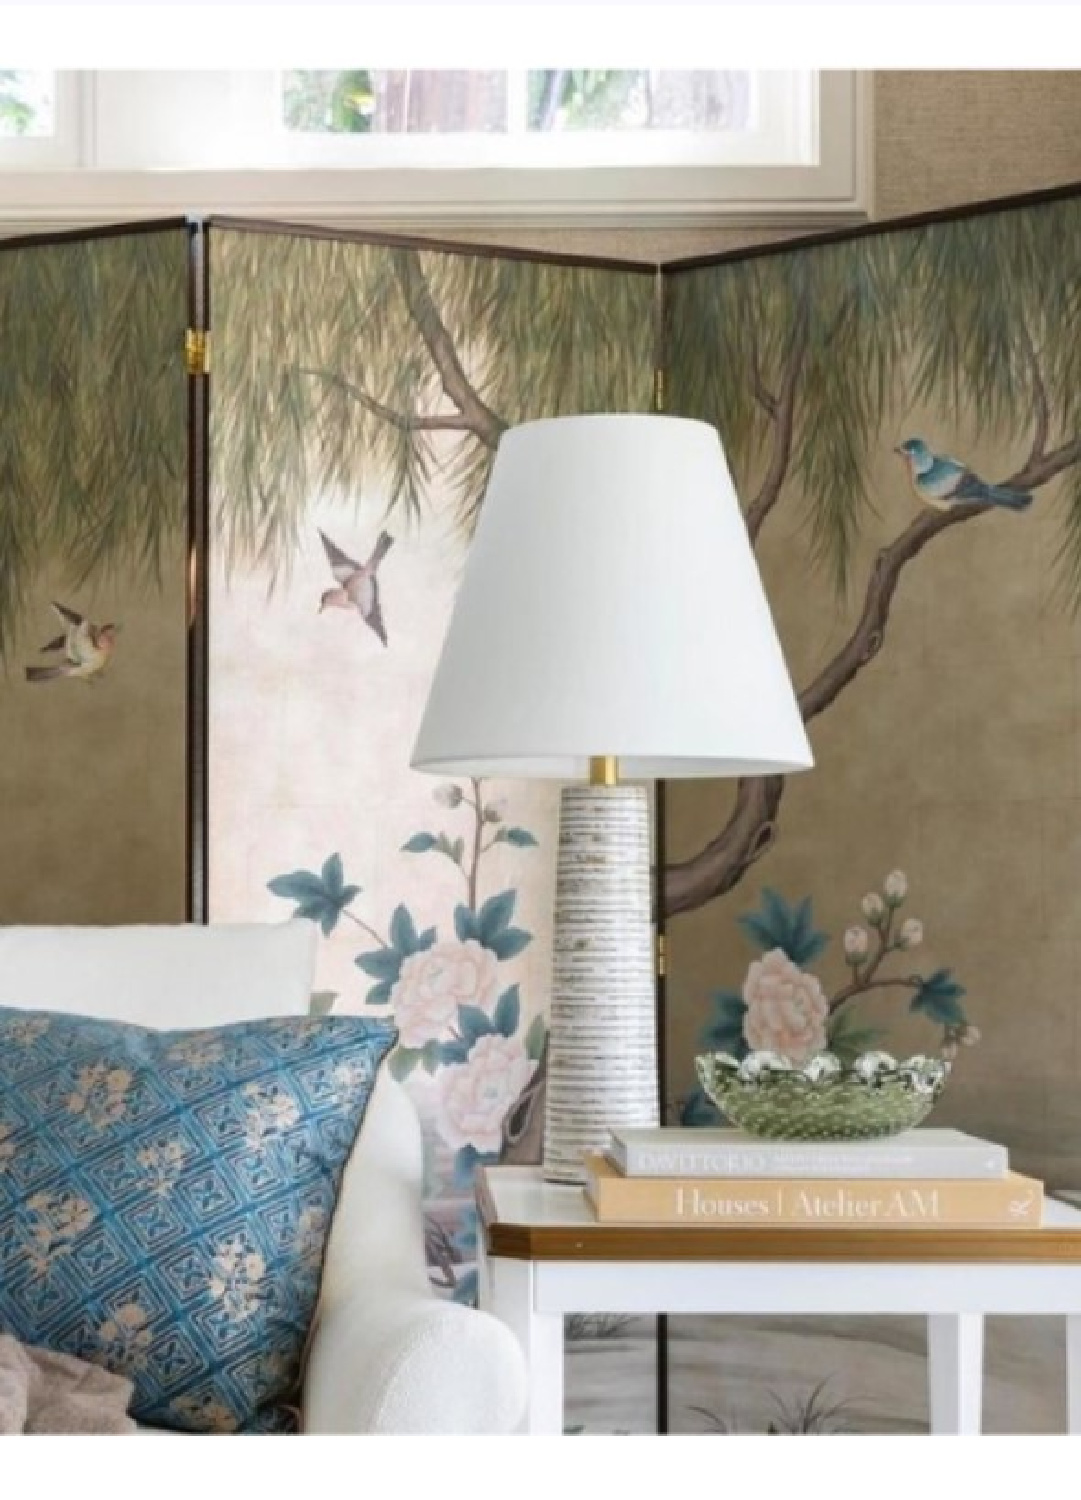 Gates Column Table Lamp (Marie Flanigan for Visual Comfort) in a lovely space with chinoiserie screen.